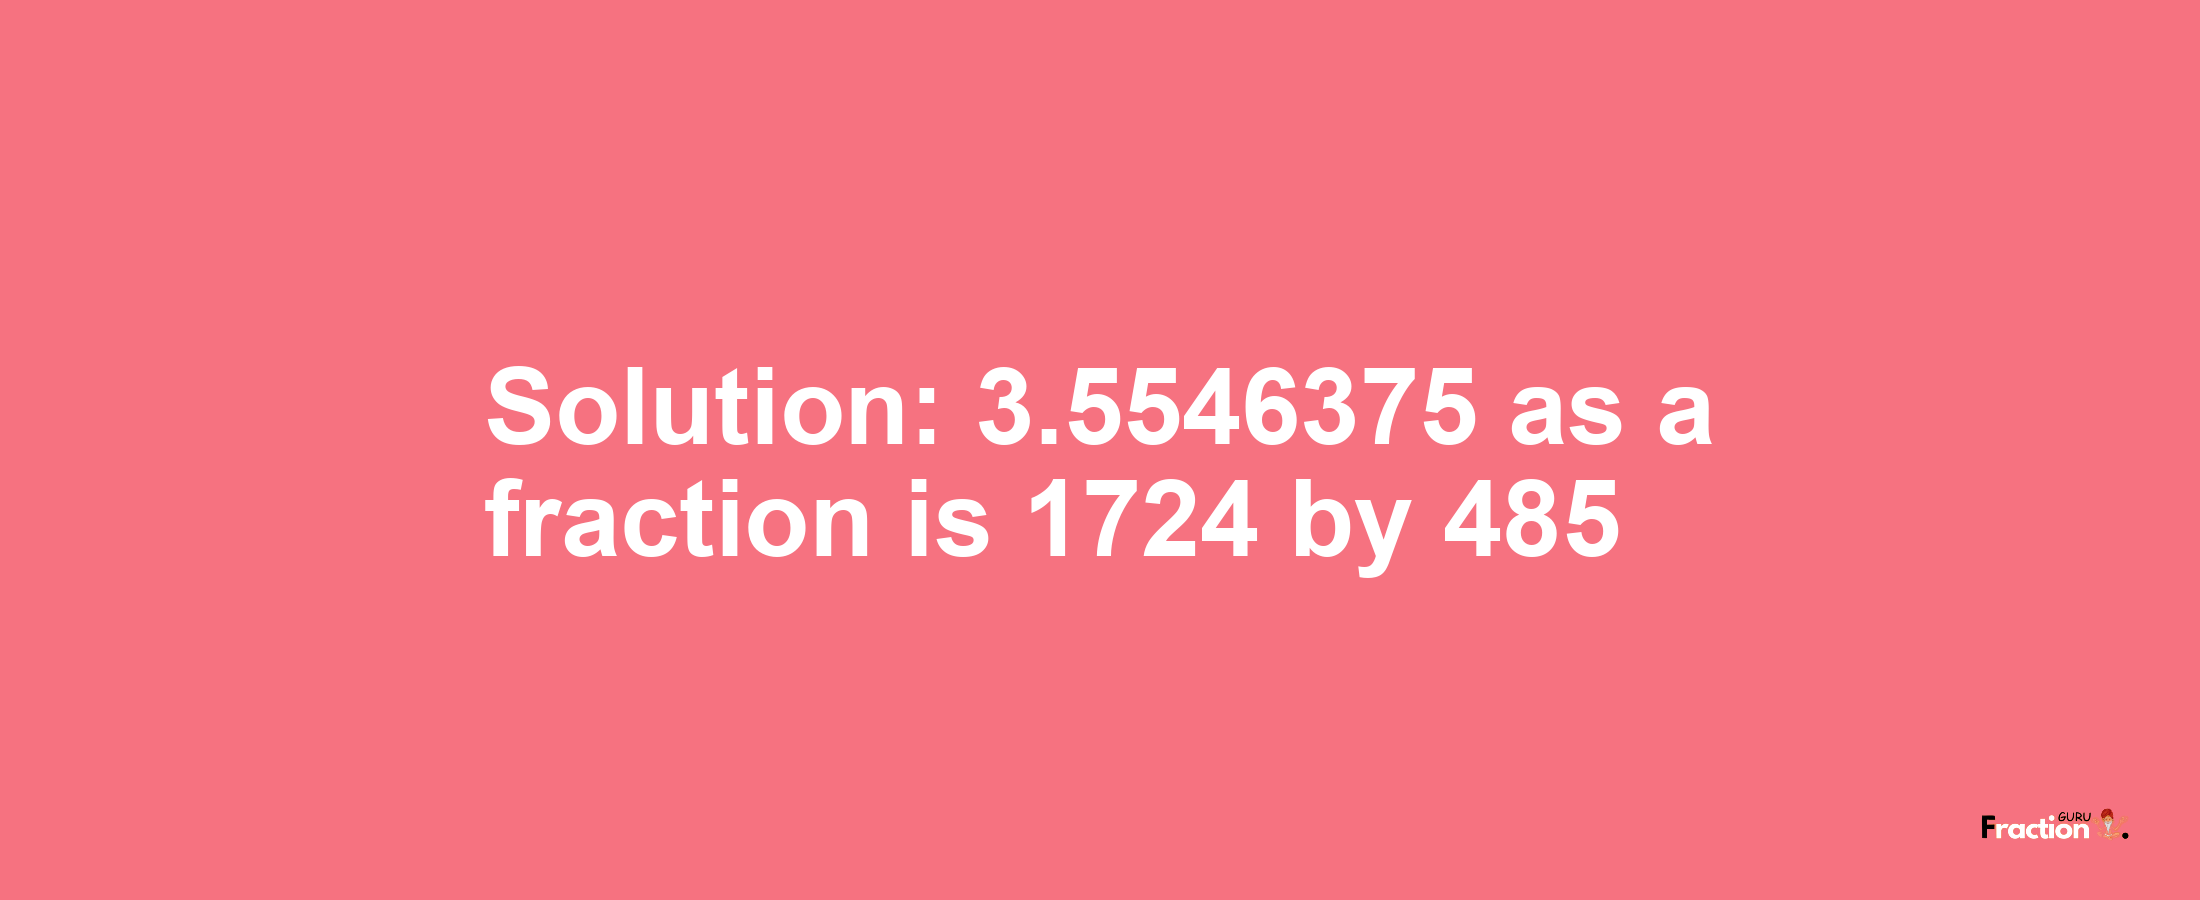 Solution:3.5546375 as a fraction is 1724/485